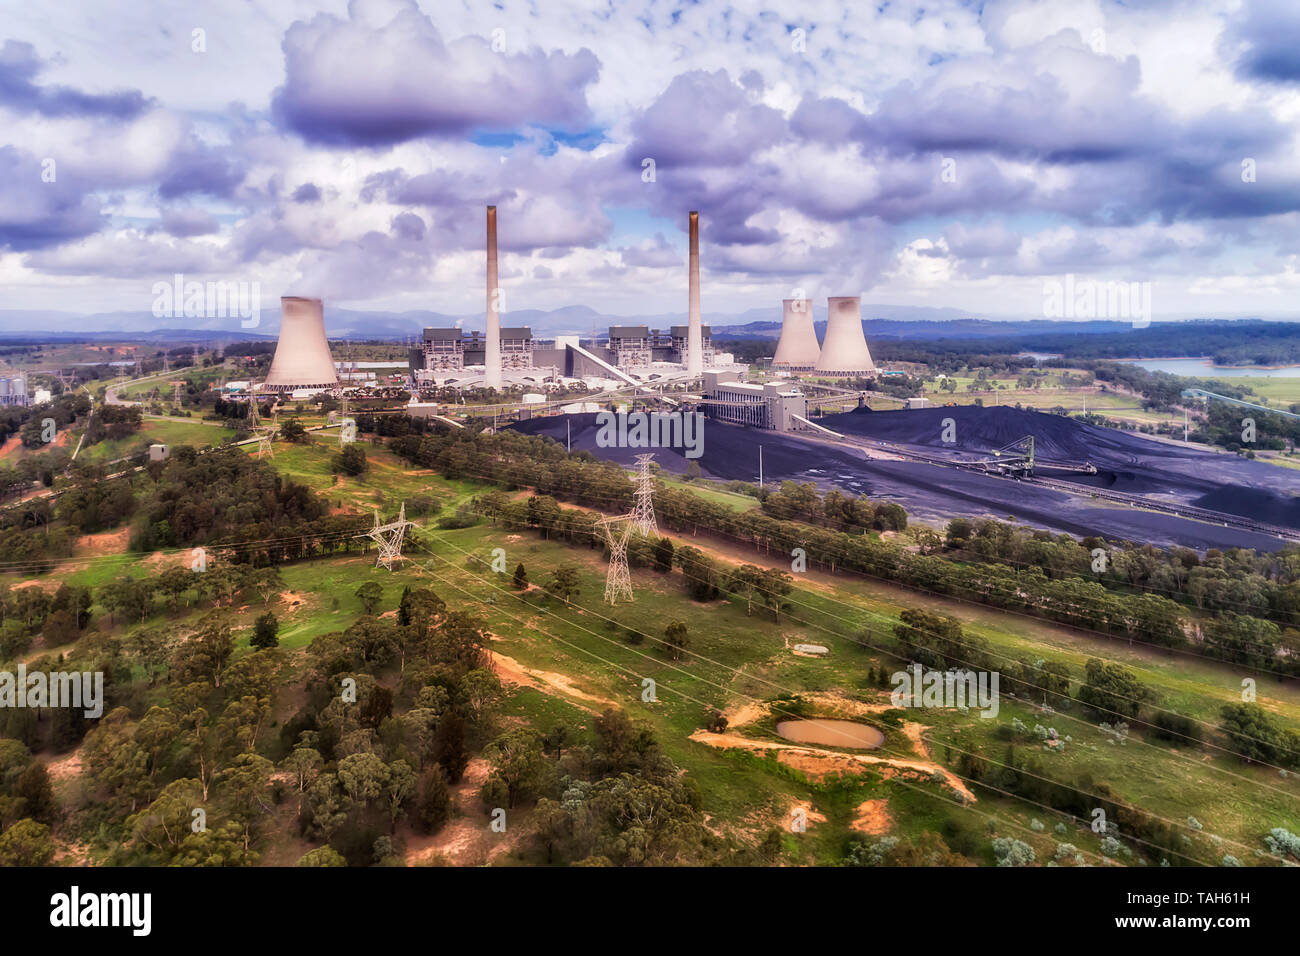 Liddell area of Hunter Valley coal basin with black coal extracted from open cut mines for generation of electricity at Bayswater power station. Stock Photo